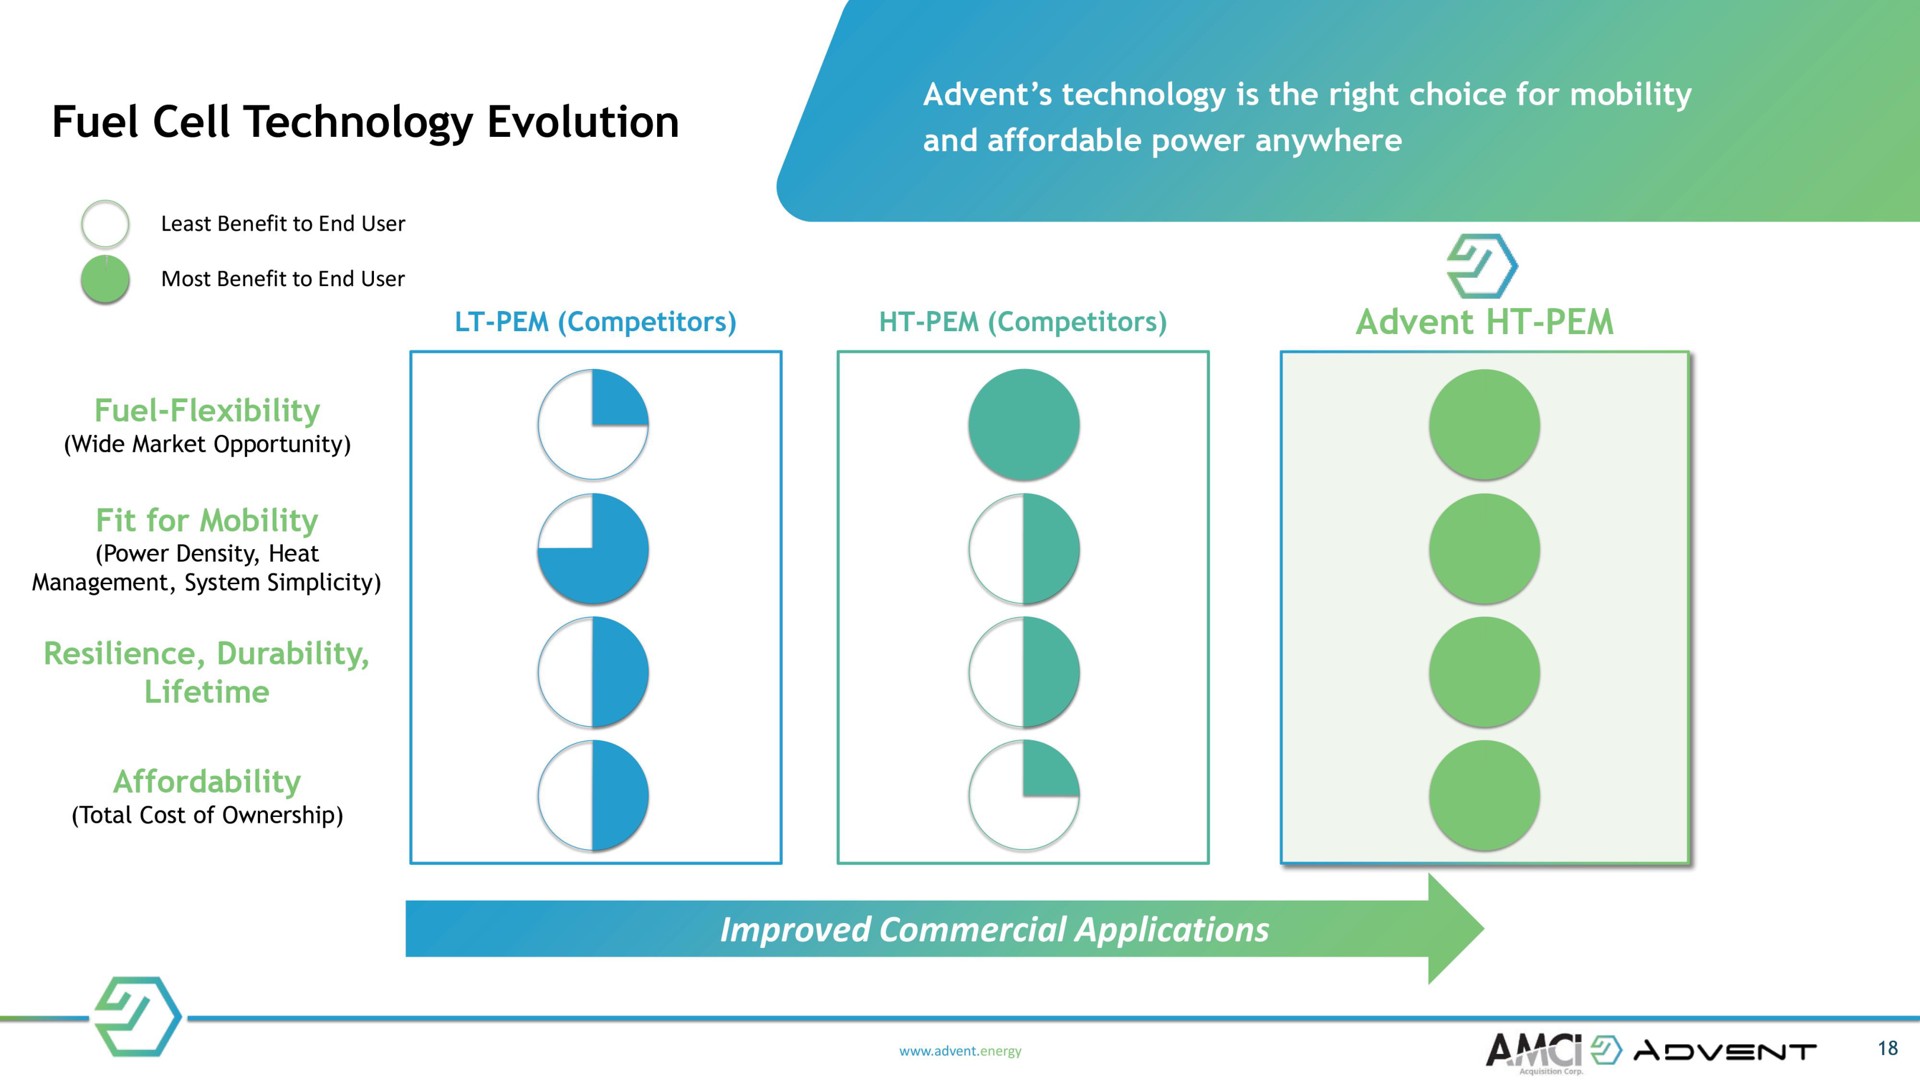 fuel cell technology evolution and affordable | Advent